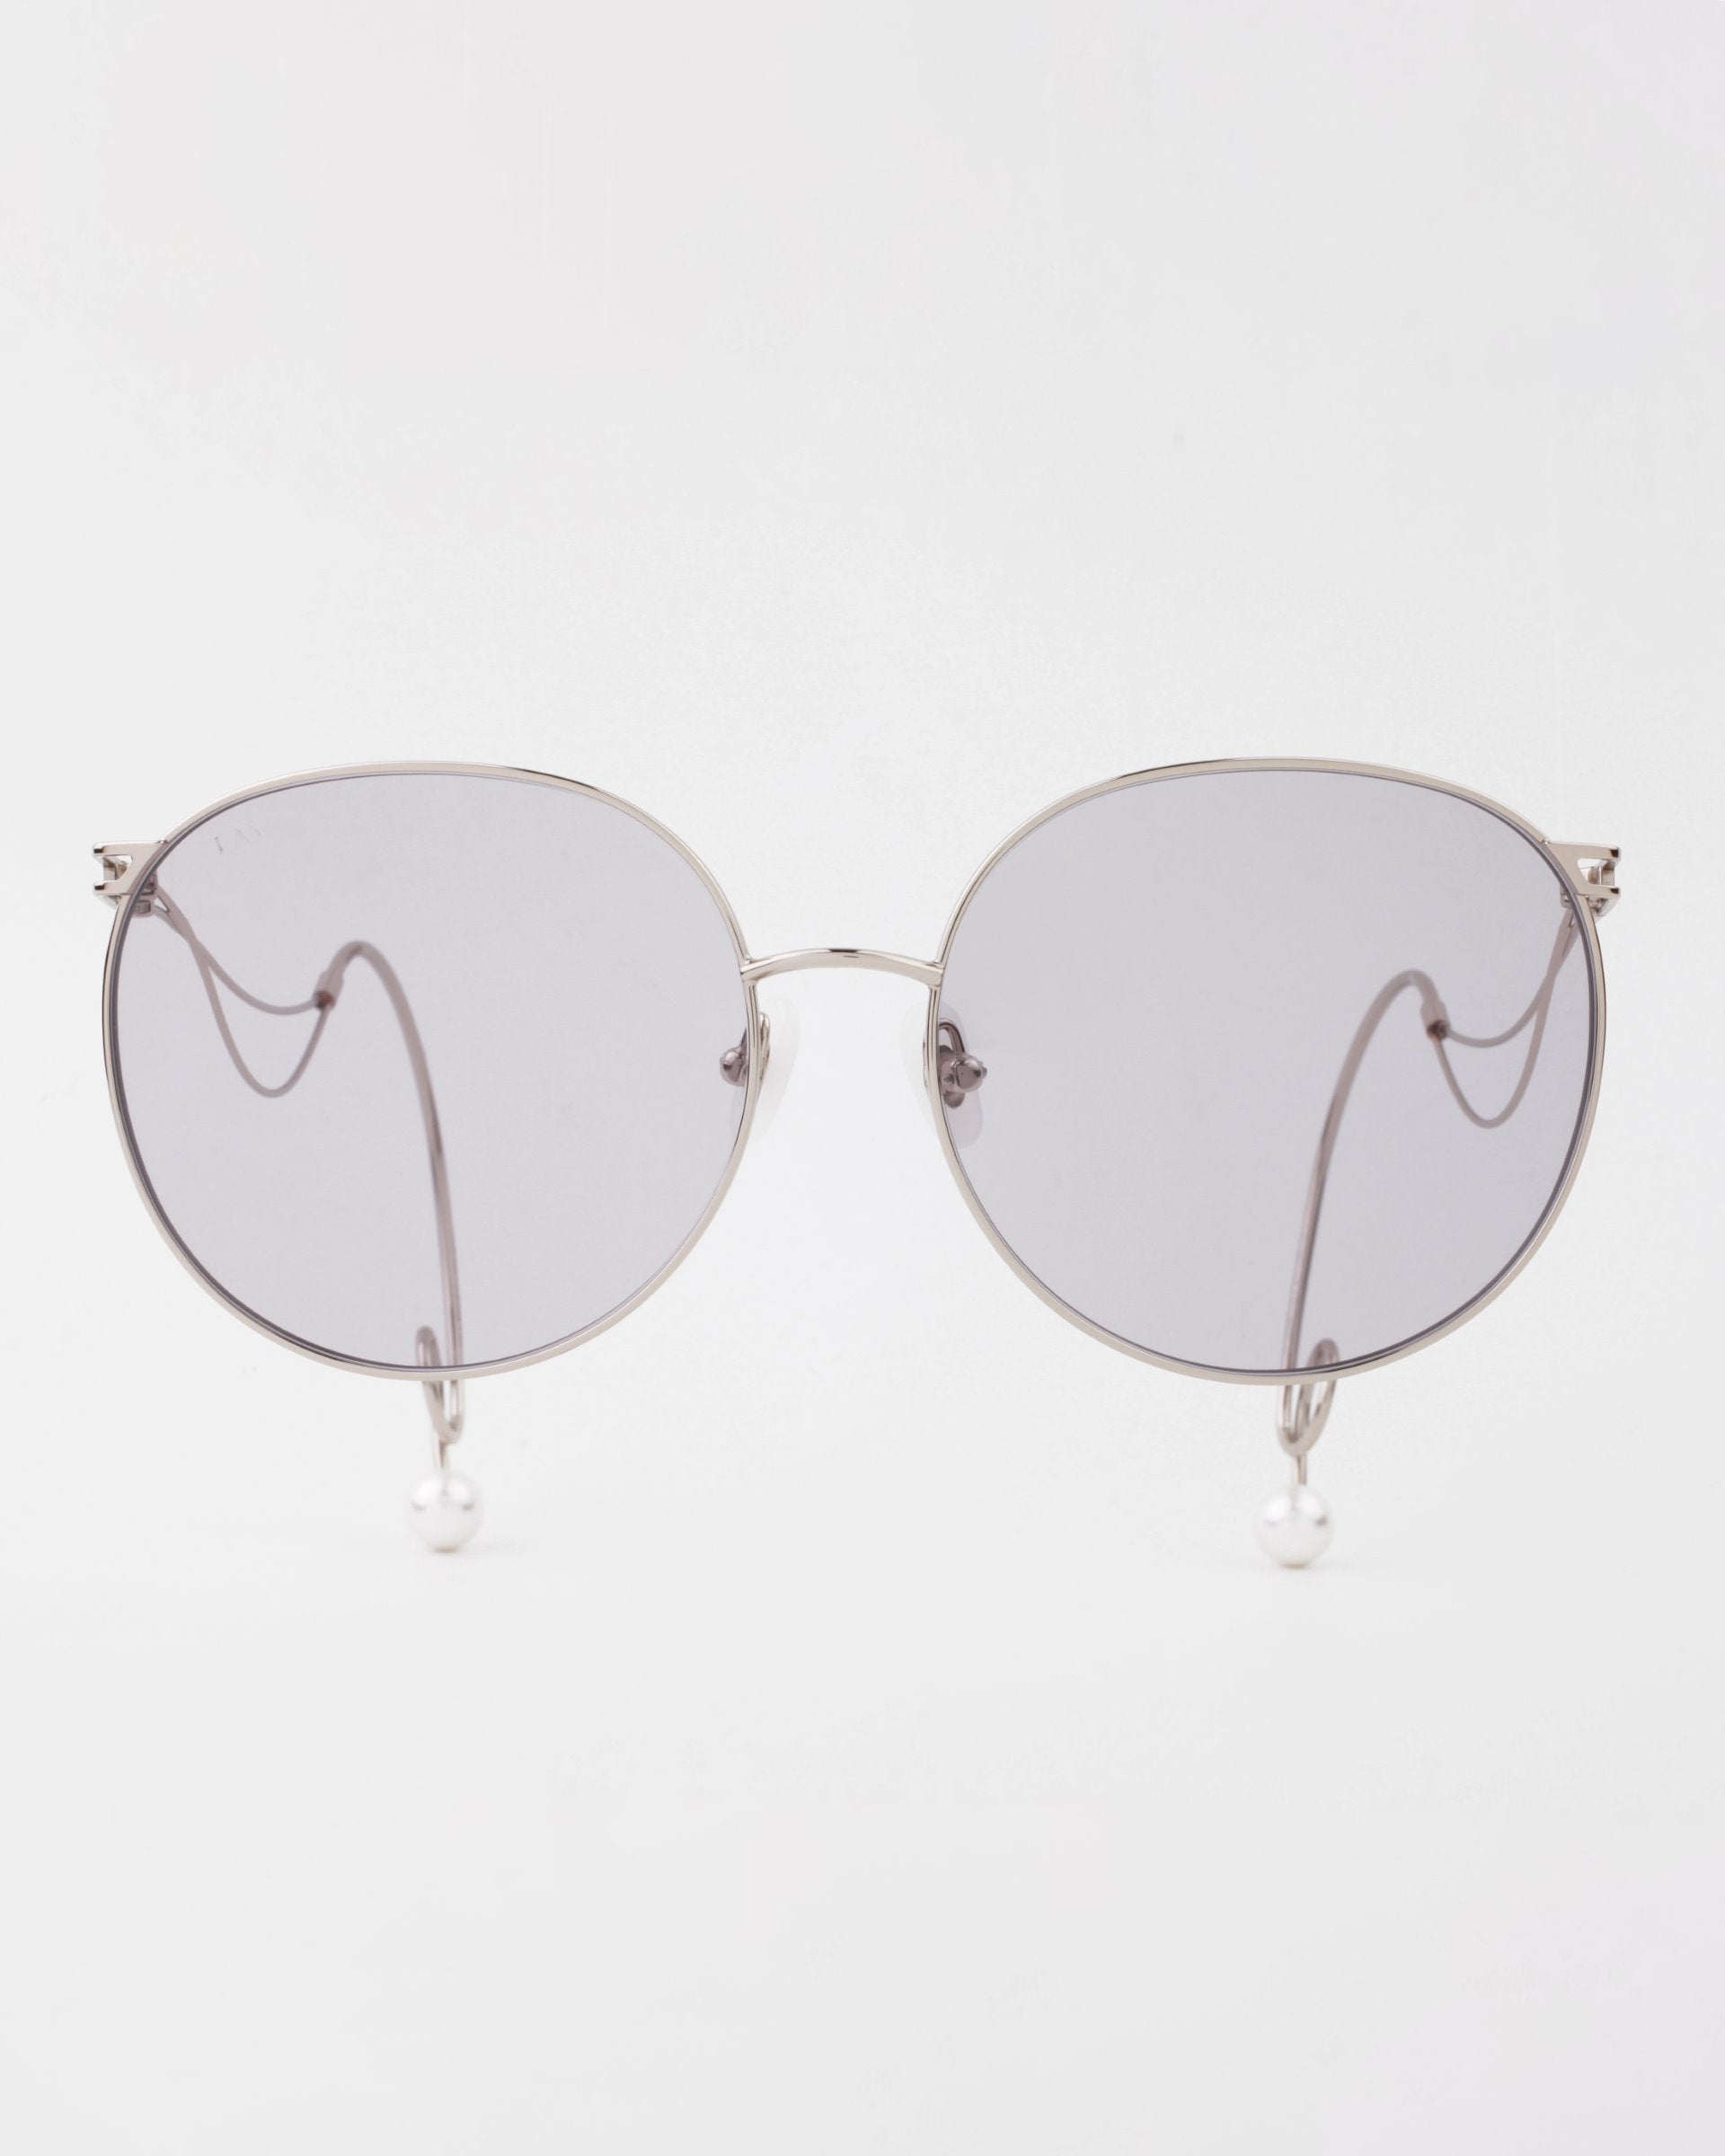 A pair of For Art&#39;s Sake® Birthday Cake silver-framed sunglasses with round, dark-tinted lenses. The temples feature a unique design with looped wire and small, pearl-like accents at the tips. Lightweight shatter-resistant lenses ensure durability and comfort. The background is plain white.